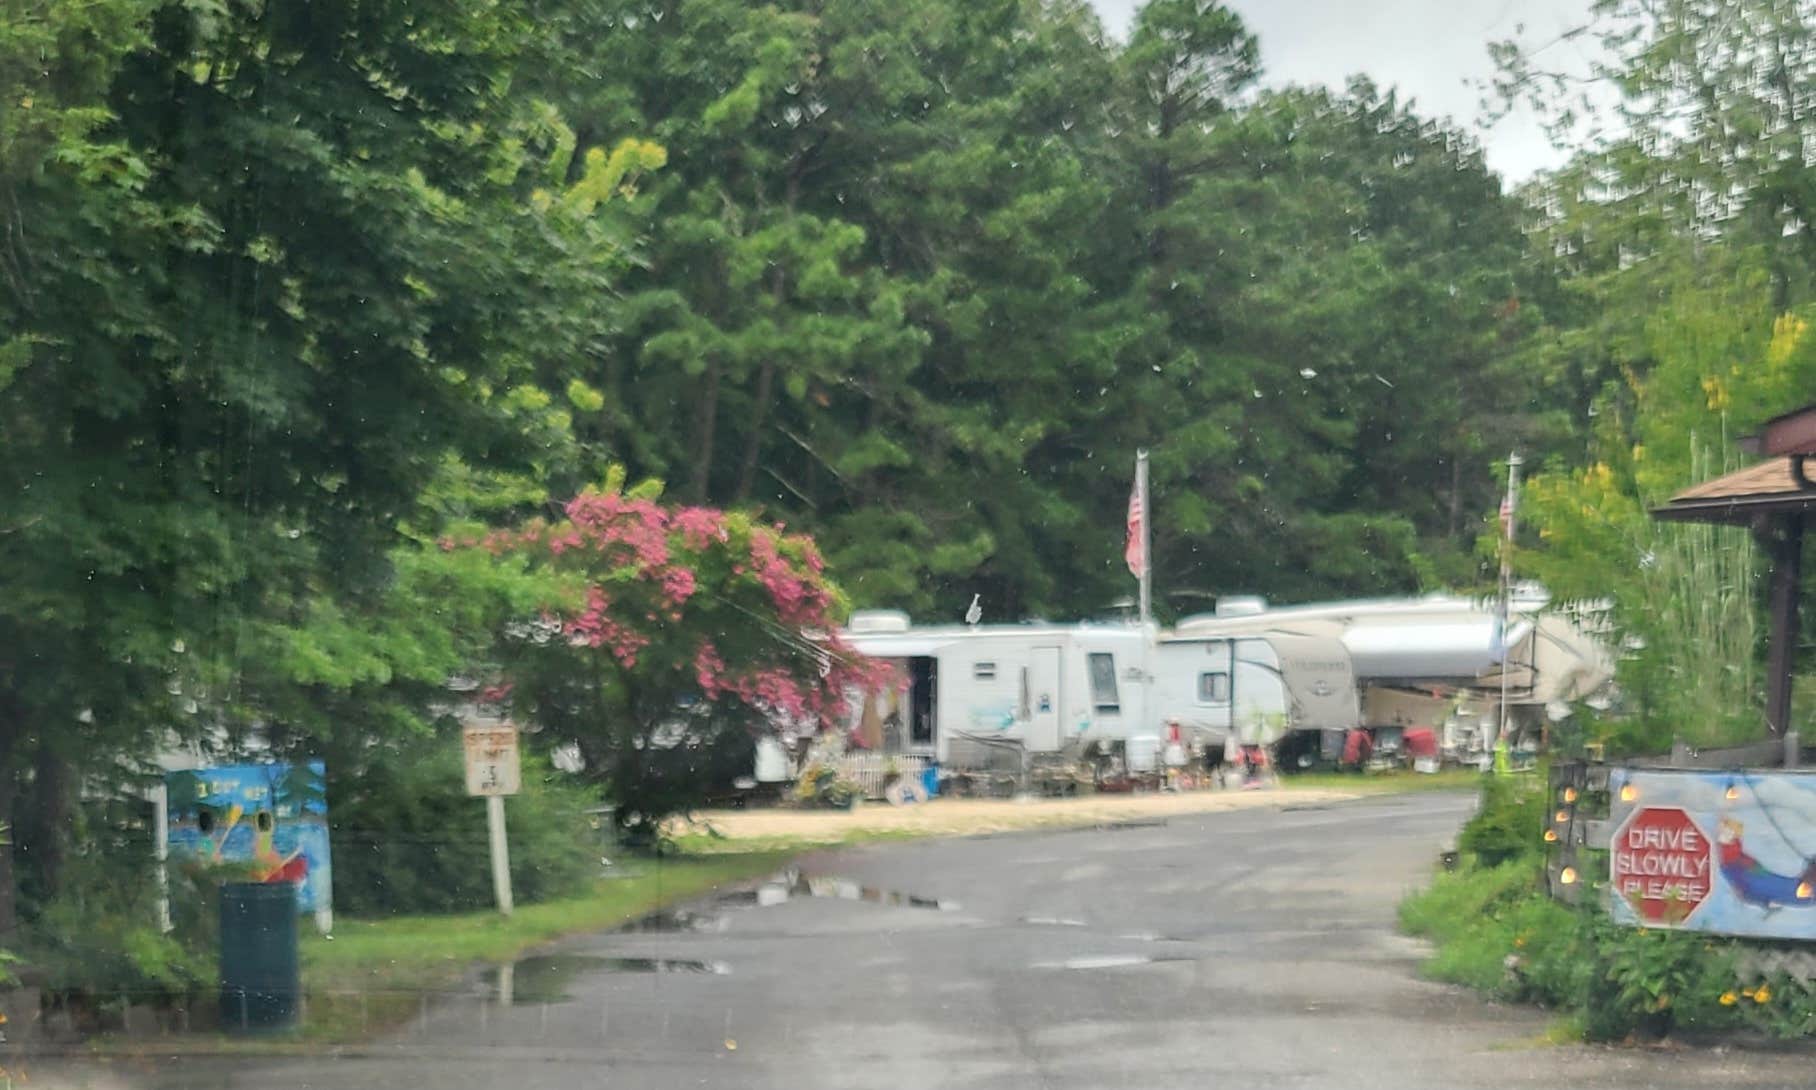 Camper submitted image from Cedar Creek Campground - PERMANENTLY CLOSED - 4